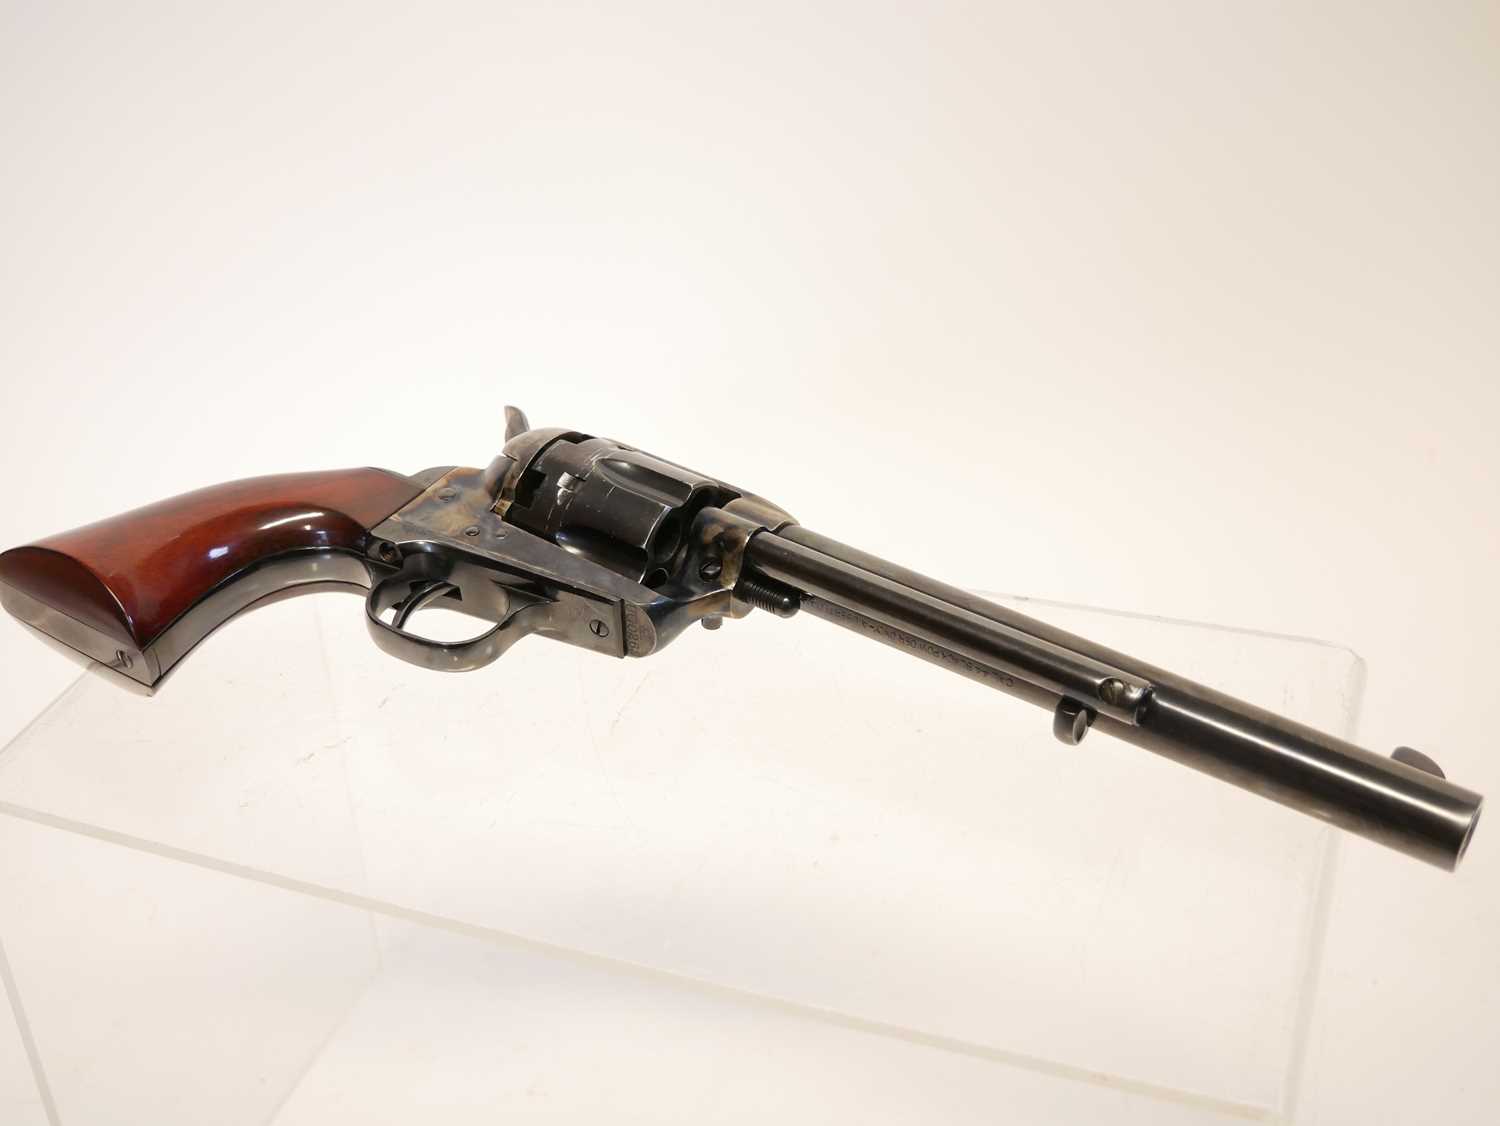 Uberti .44 percussion muzzle loading cattleman revolver, serial number UG0263, 7.5inch barrel, - Image 2 of 10